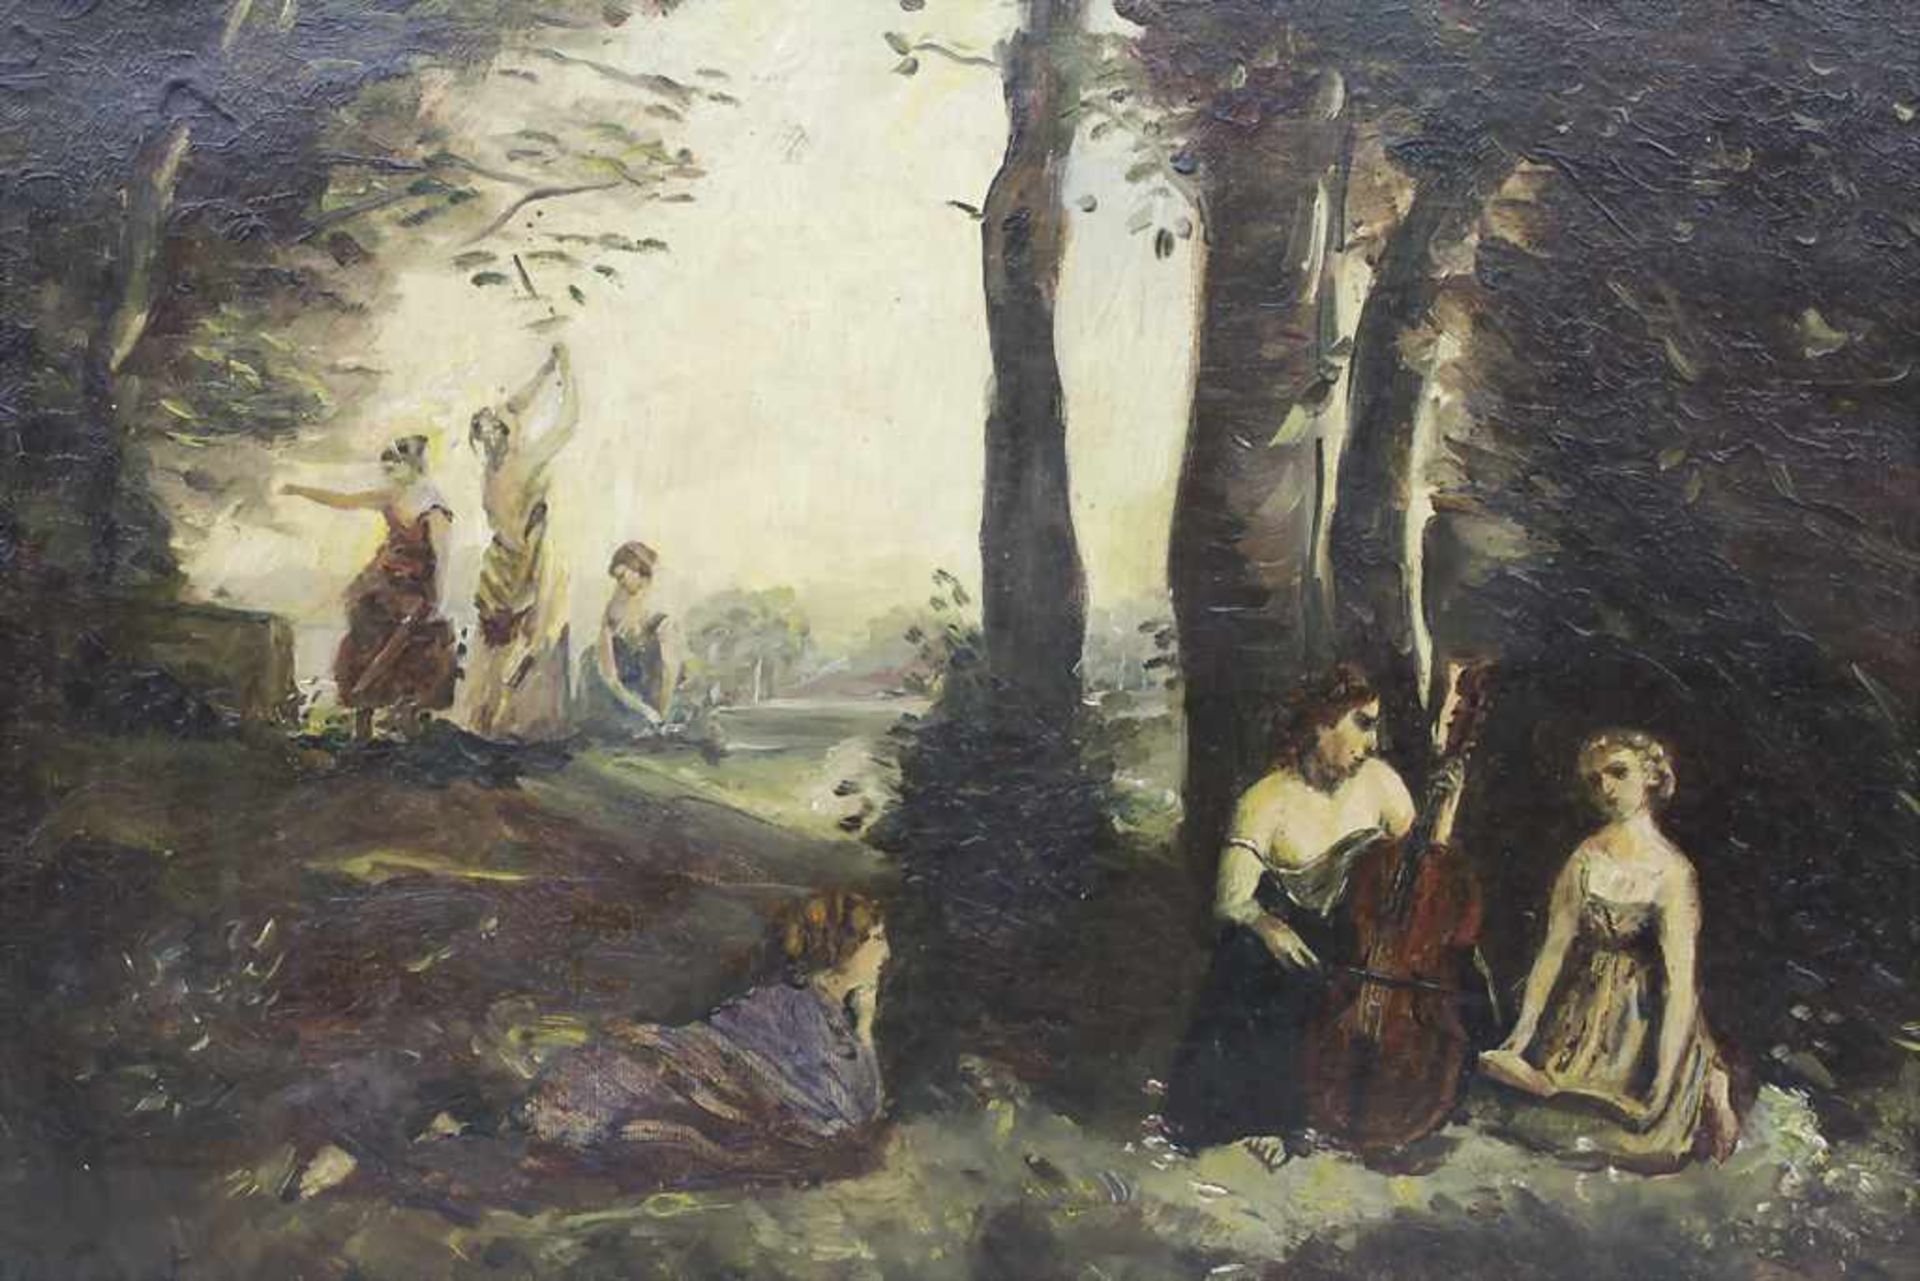 C.J. Corot (19. Jh.), 'Picknick im Park' / 'A picnic in the park' - Image 3 of 8